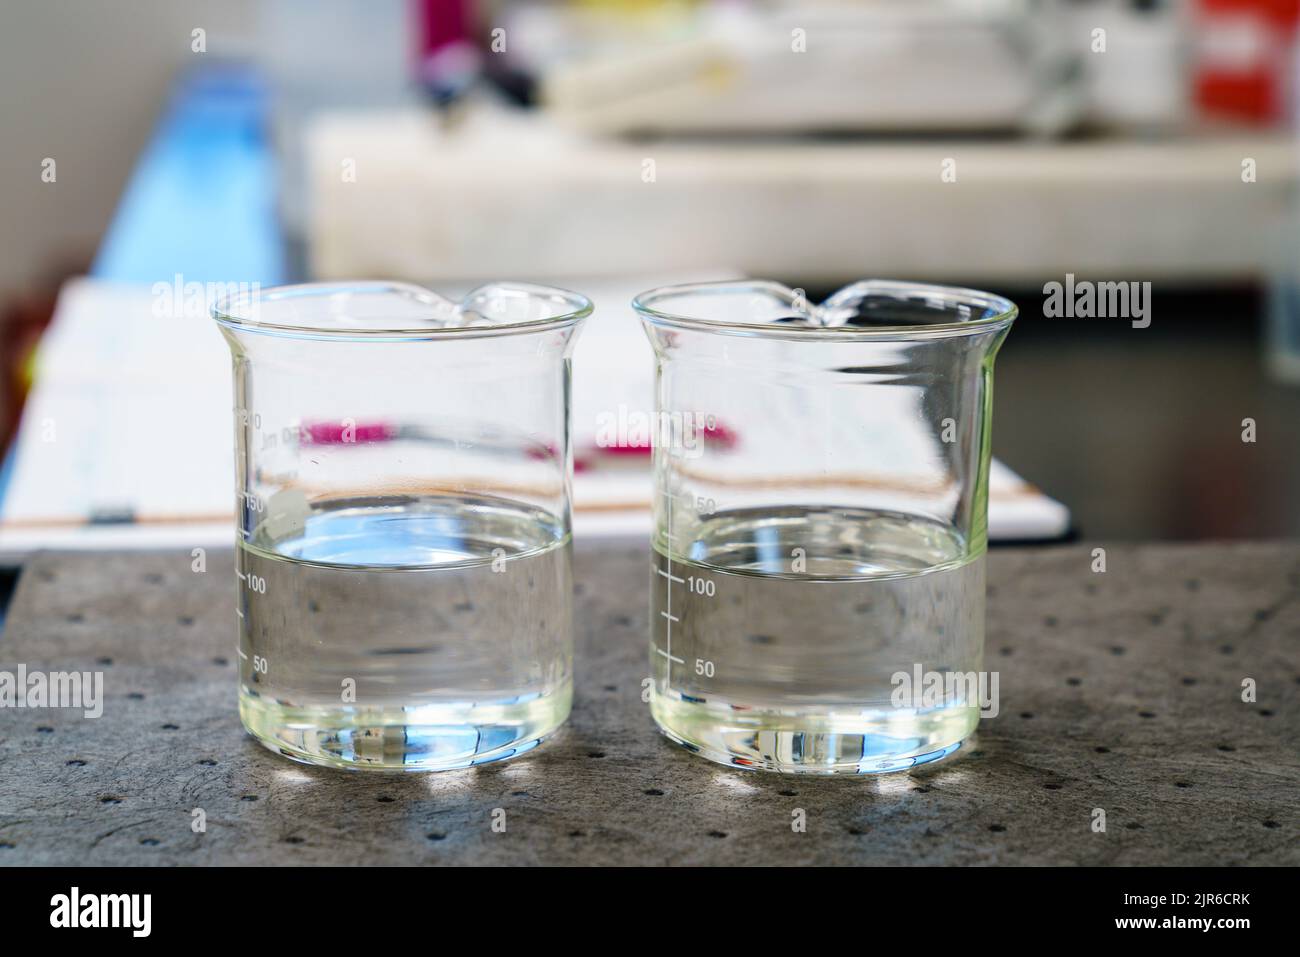 Two beakers with clear liquids on a pad in a laboratory Stock Photo